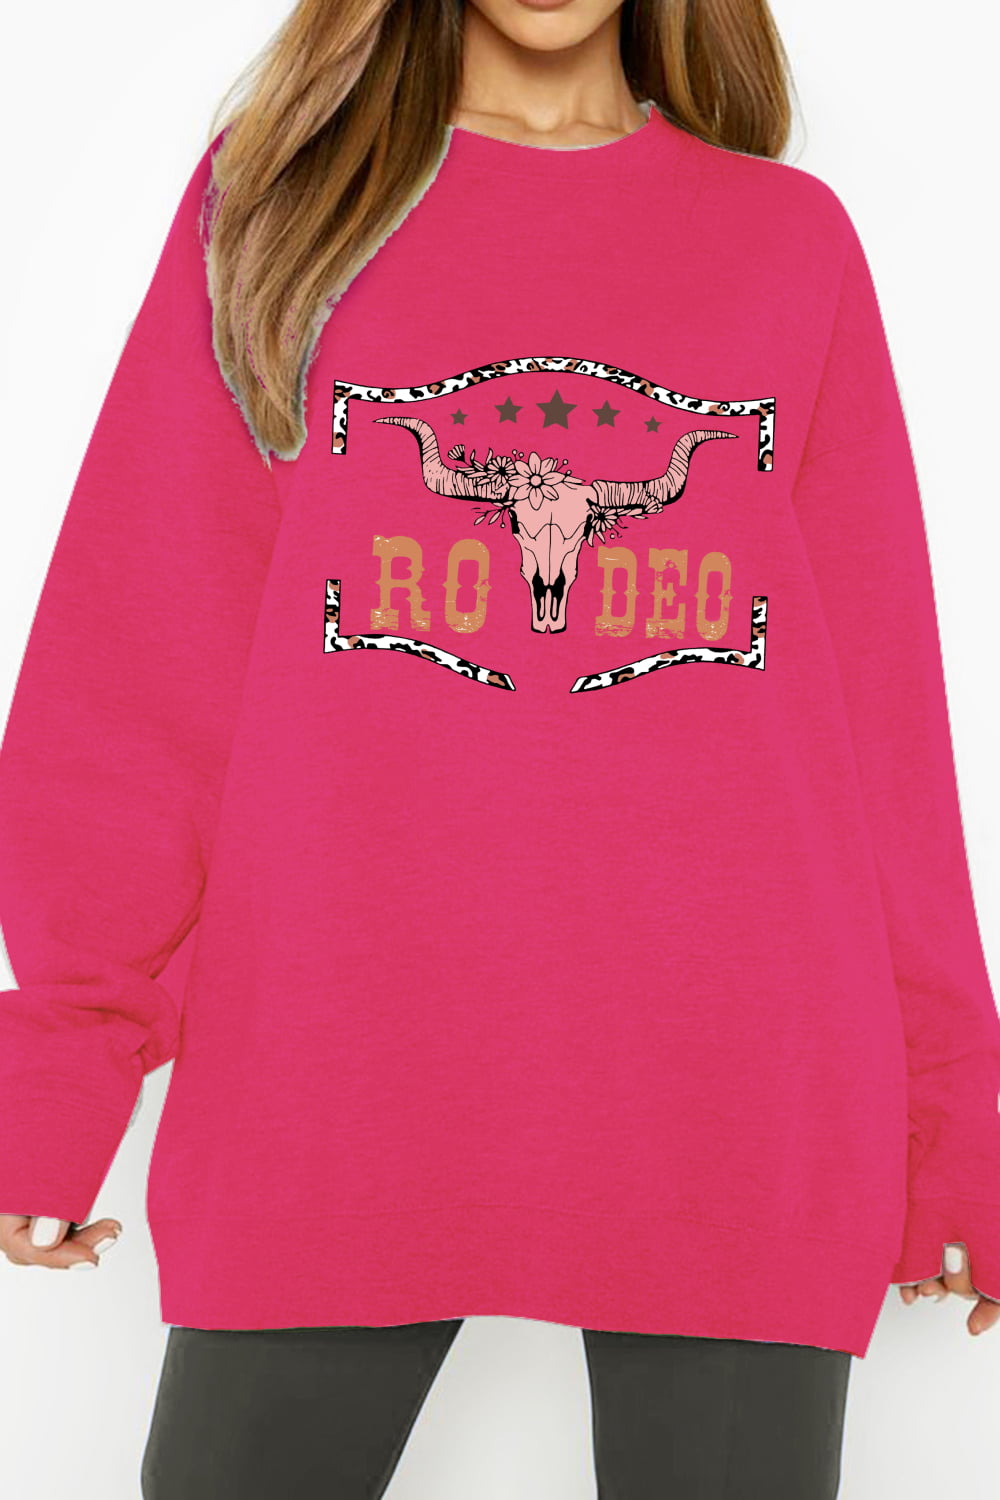 Simply Love Simply Love Full Size Round Neck Dropped Shoulder RODEO Graphic Sweatshirt